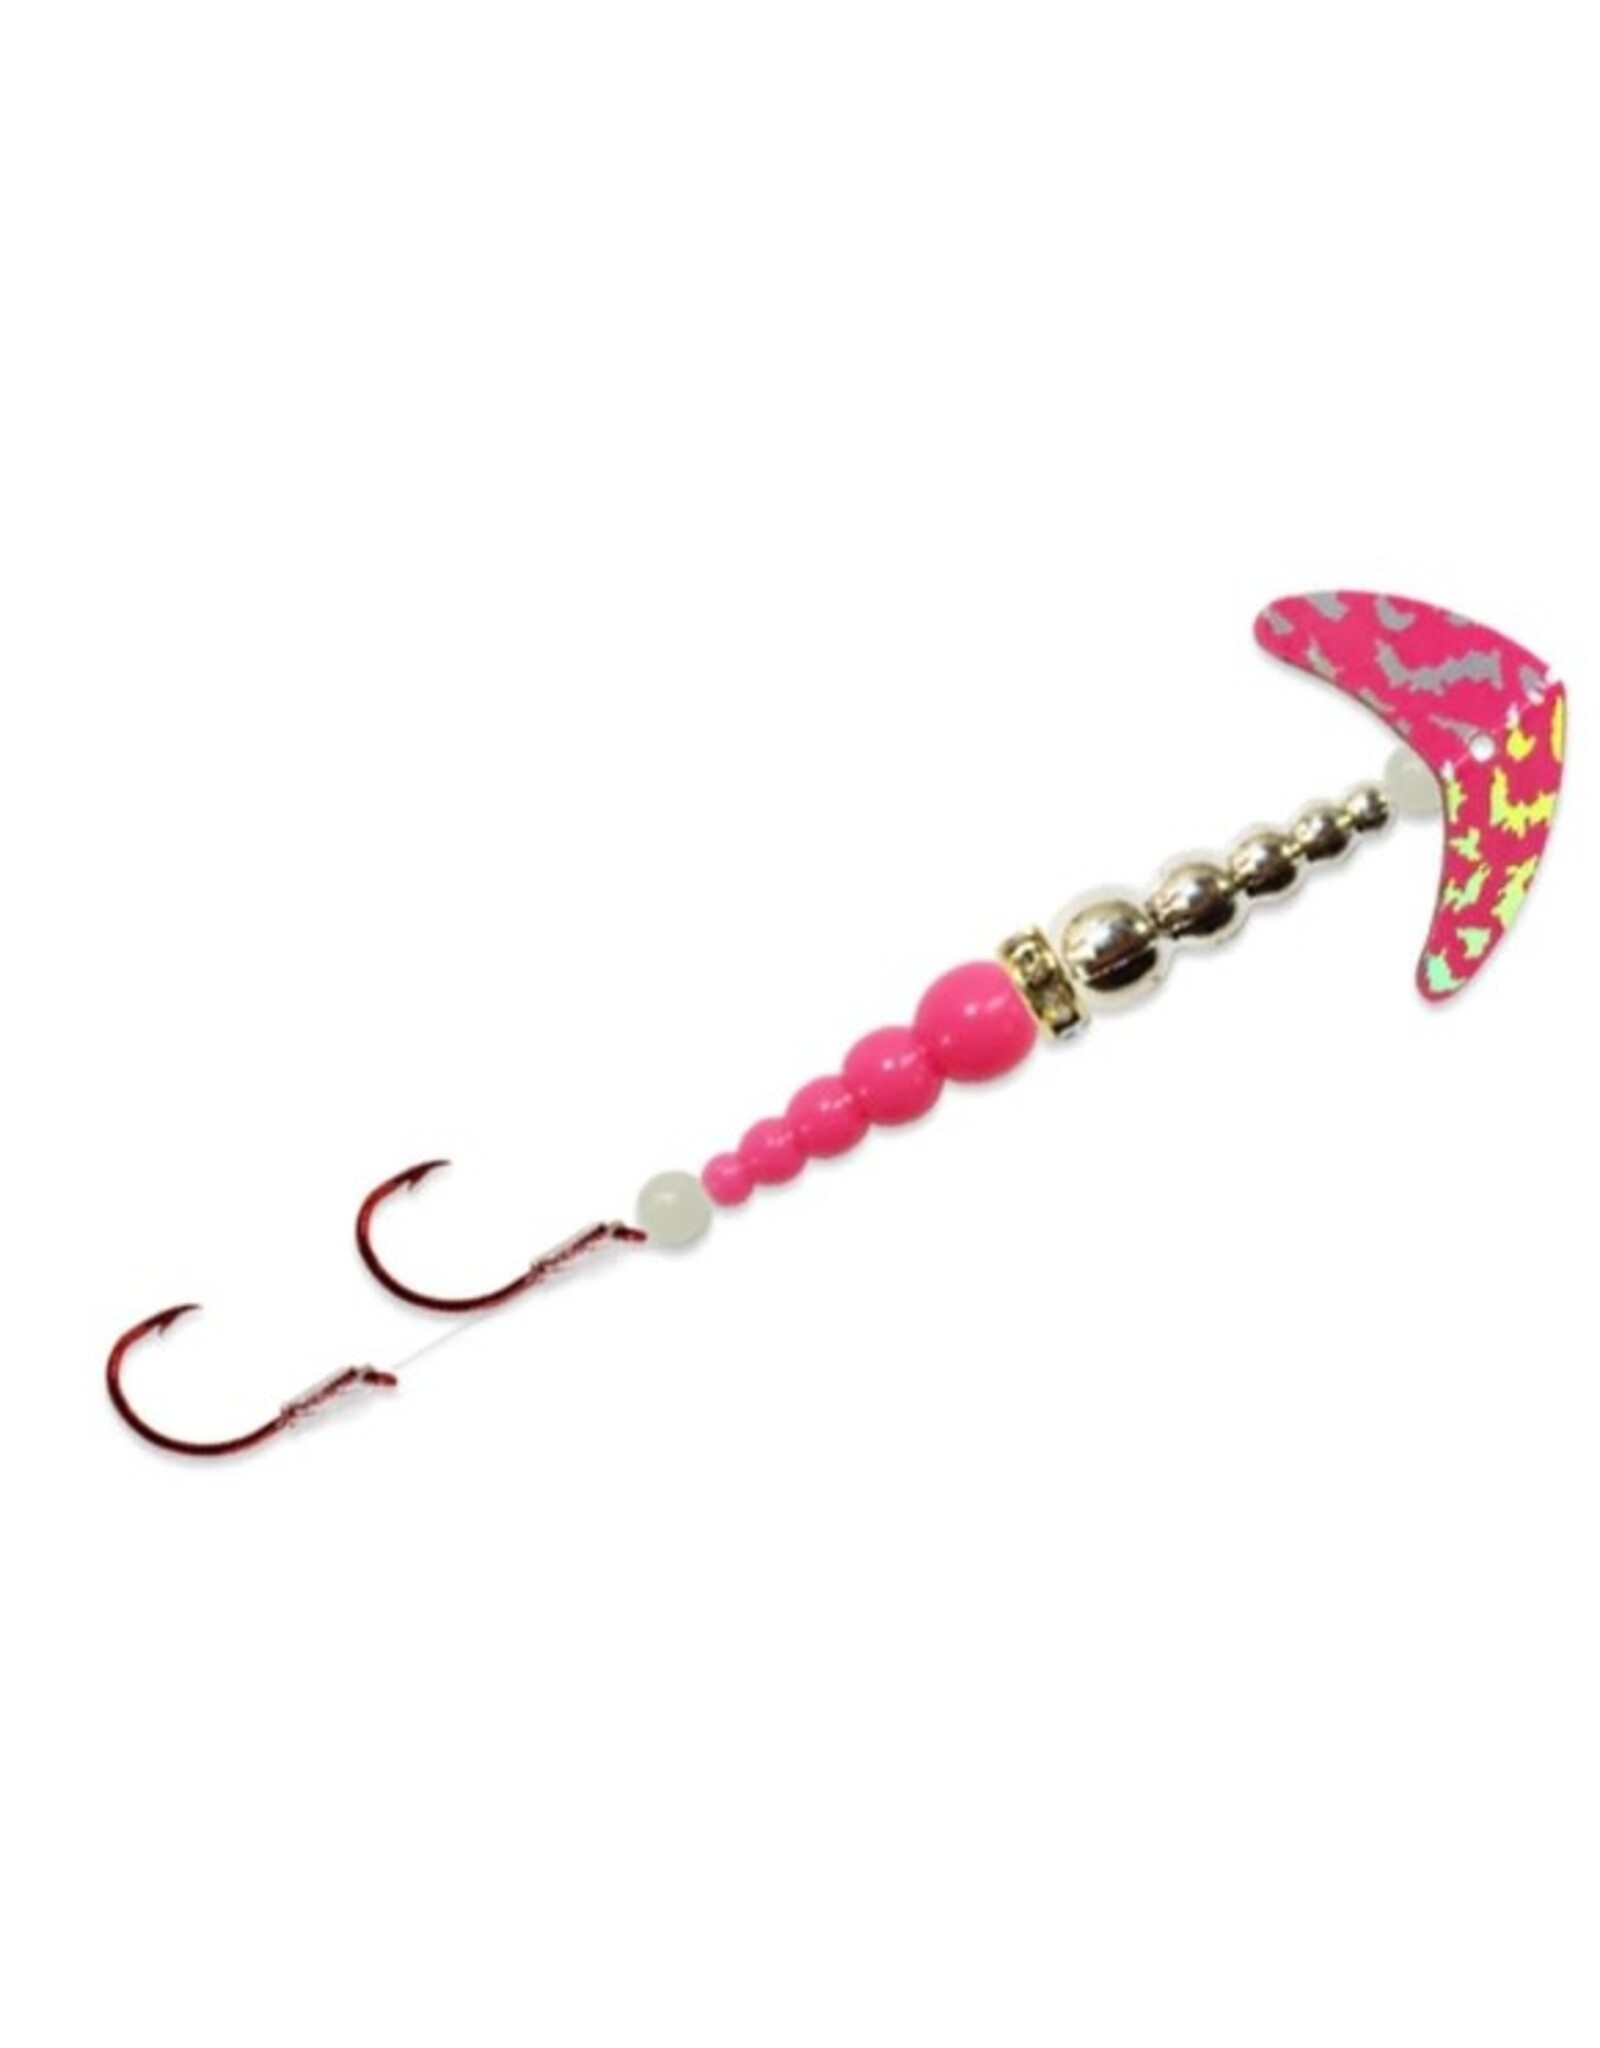 Mack's Double Whammy Kokanee Pro - Size 4 - Hot Pink Silver Tiger/Silver/Pink